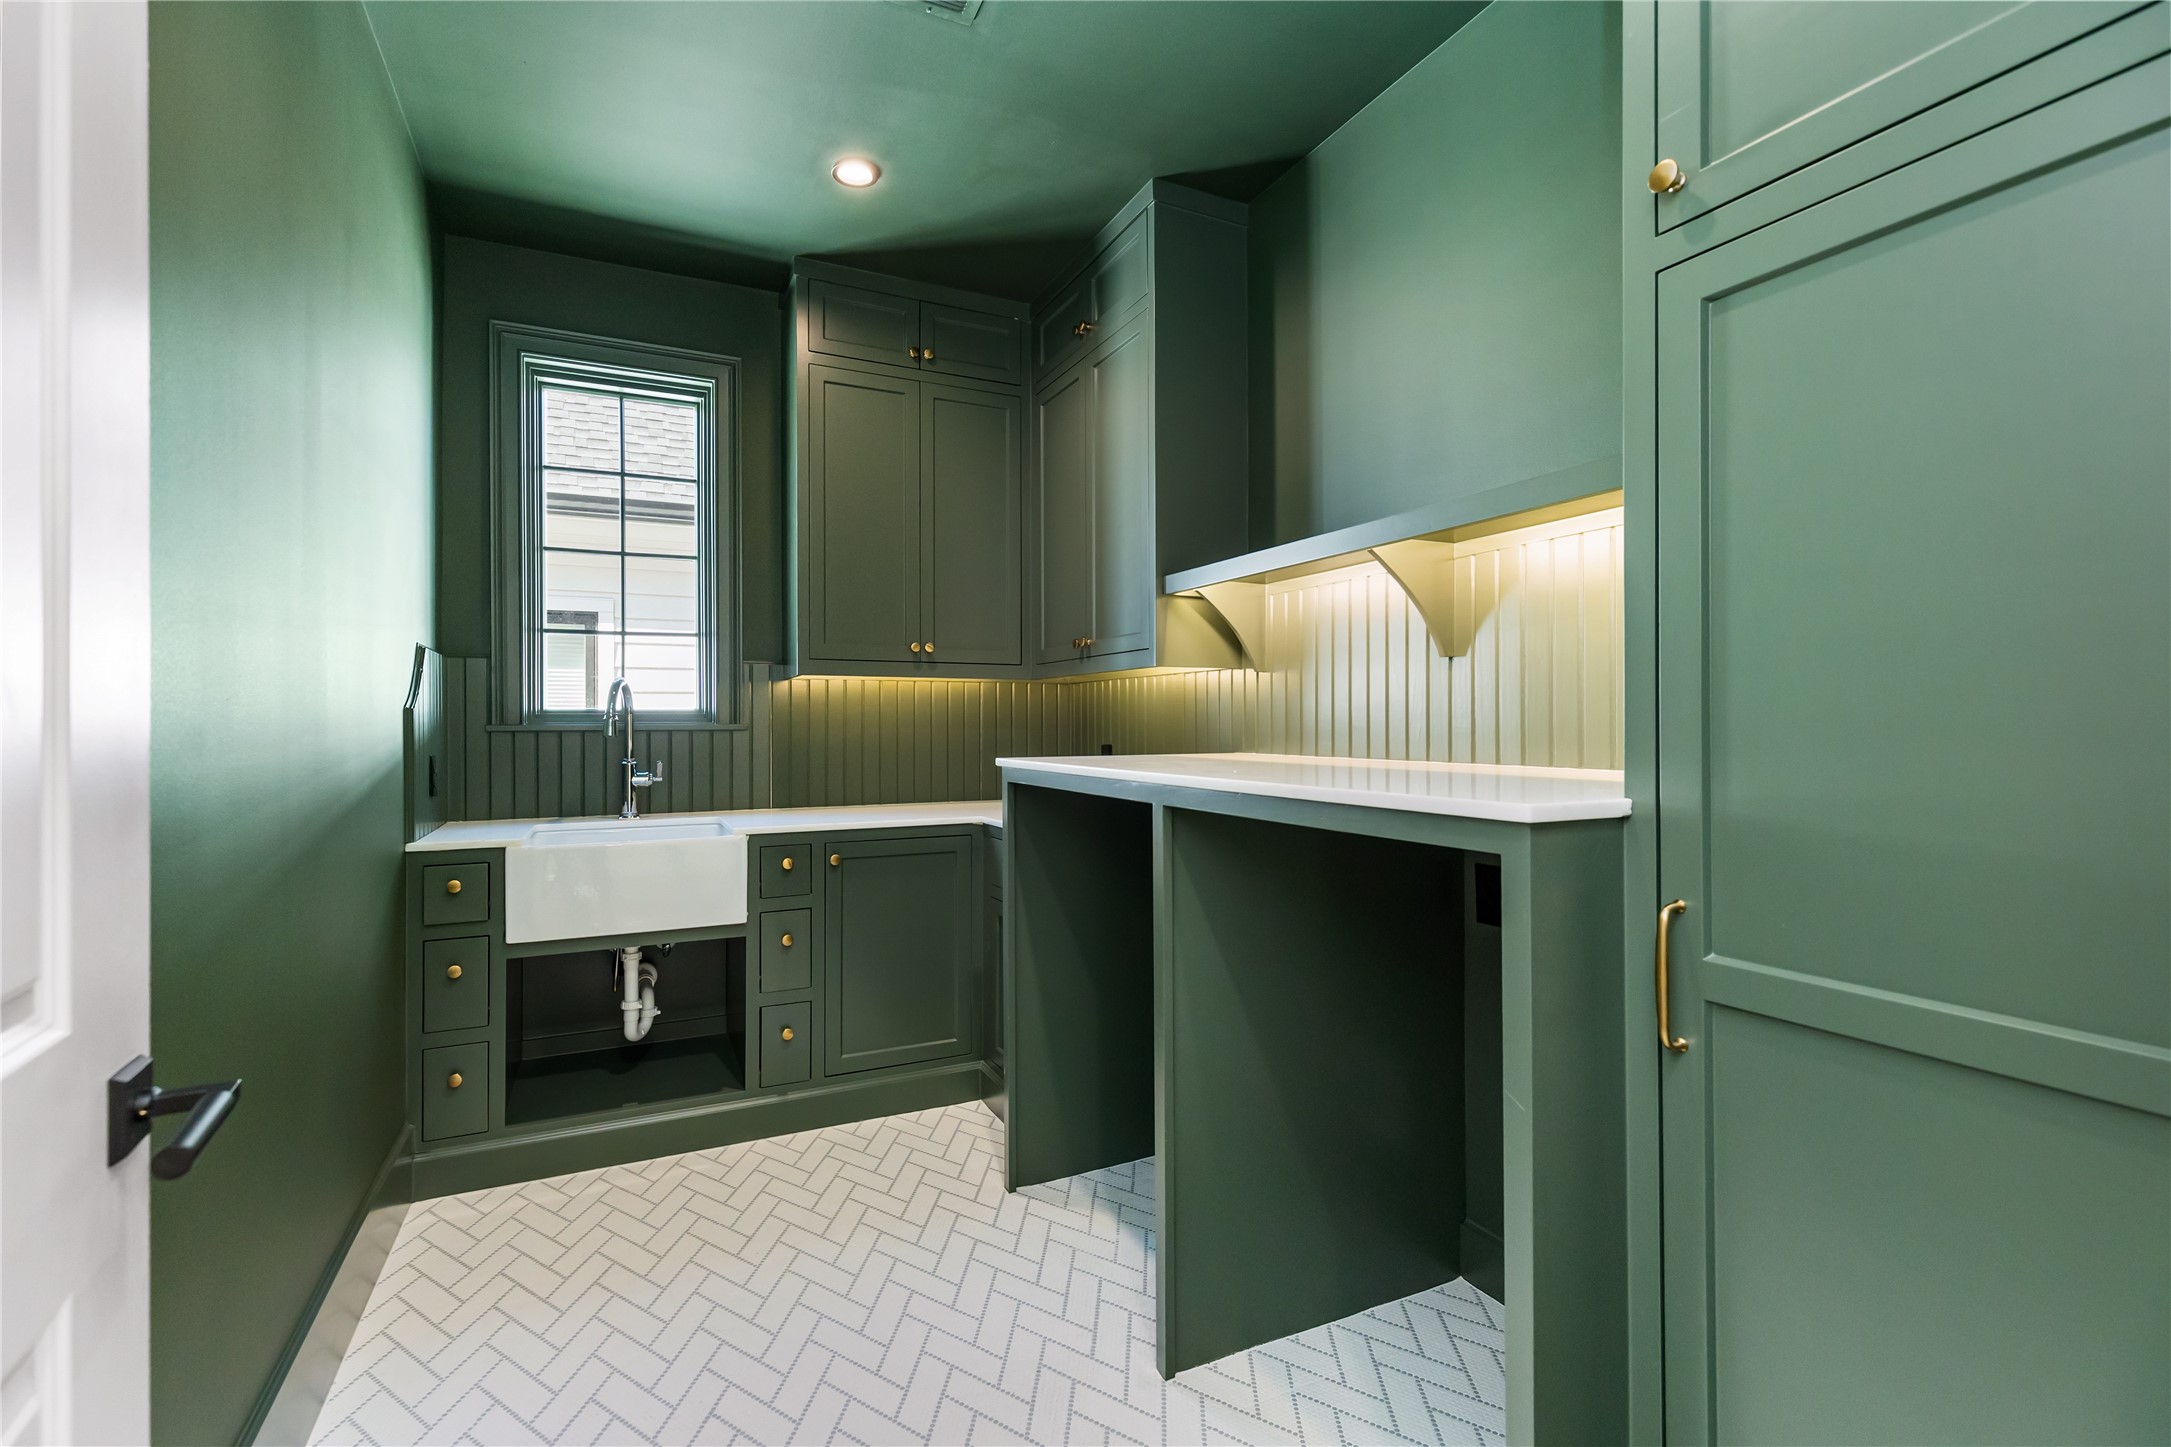 Laundry room is thoughtfully located on the second floor near primary and secondary bedrooms and features Harmonie Bridge recycled glass mosaic tile floor, tongue and groove backsplash detail, utility sink and Noble marble counter tops